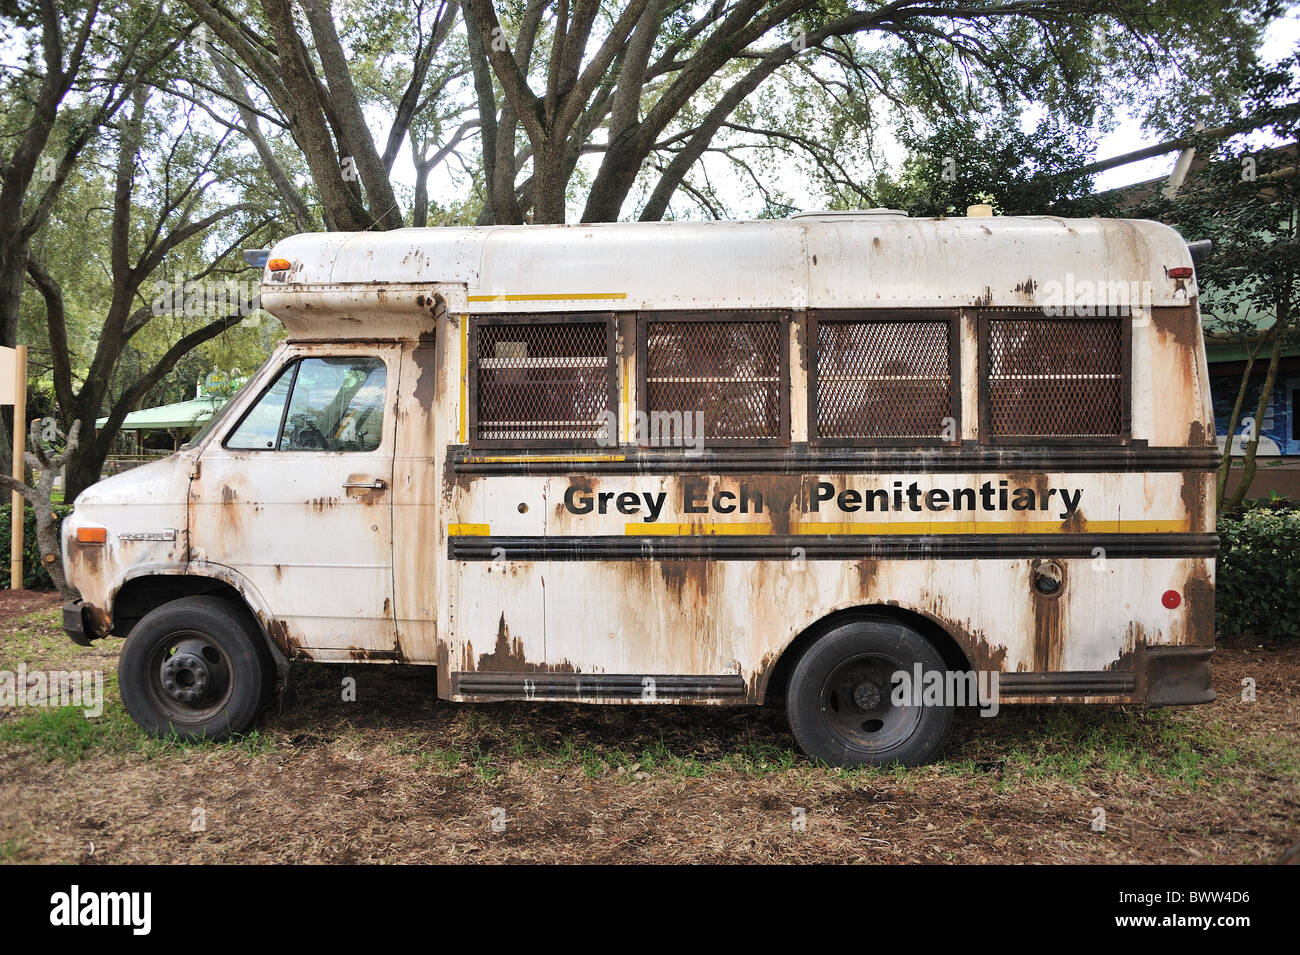 Old Penitentiary bus Busch Gardens Florida Stock Photo